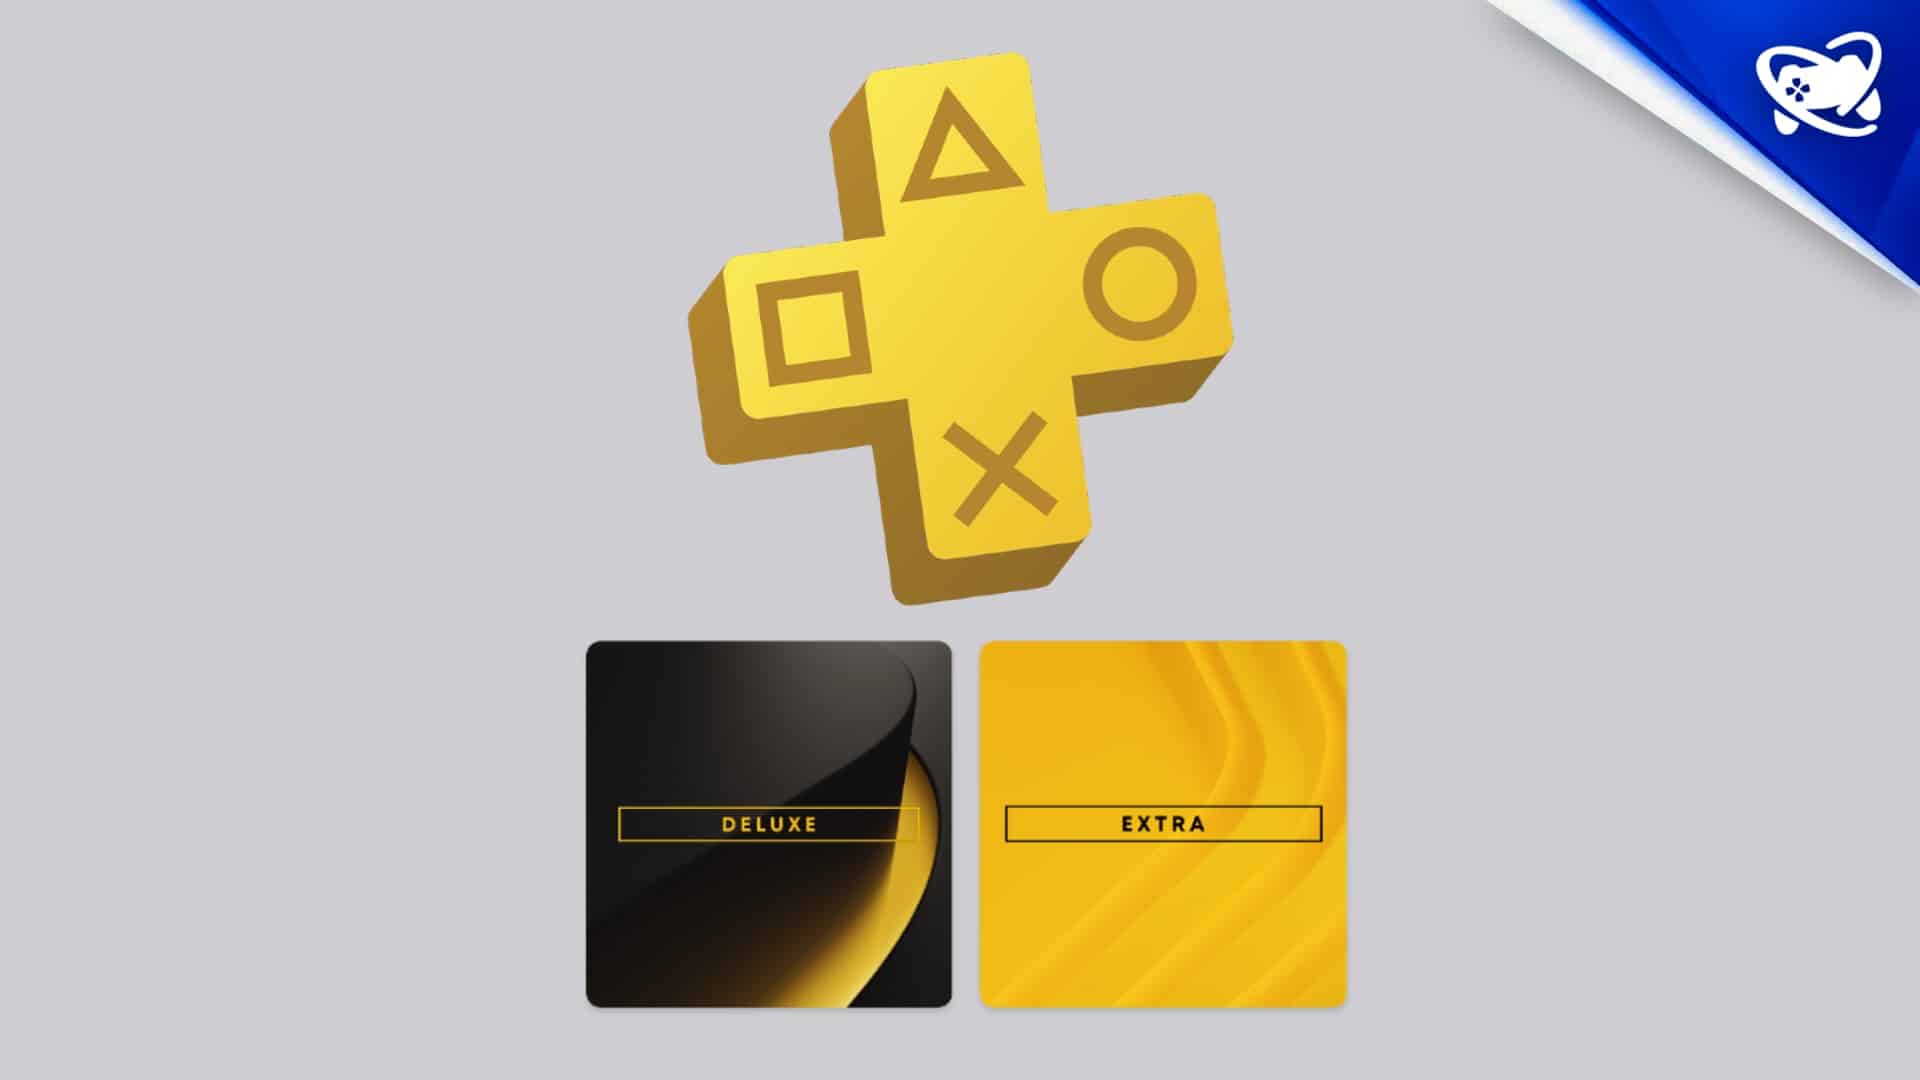 Sony unveils the first PS Plus Extra and Deluxe game for April